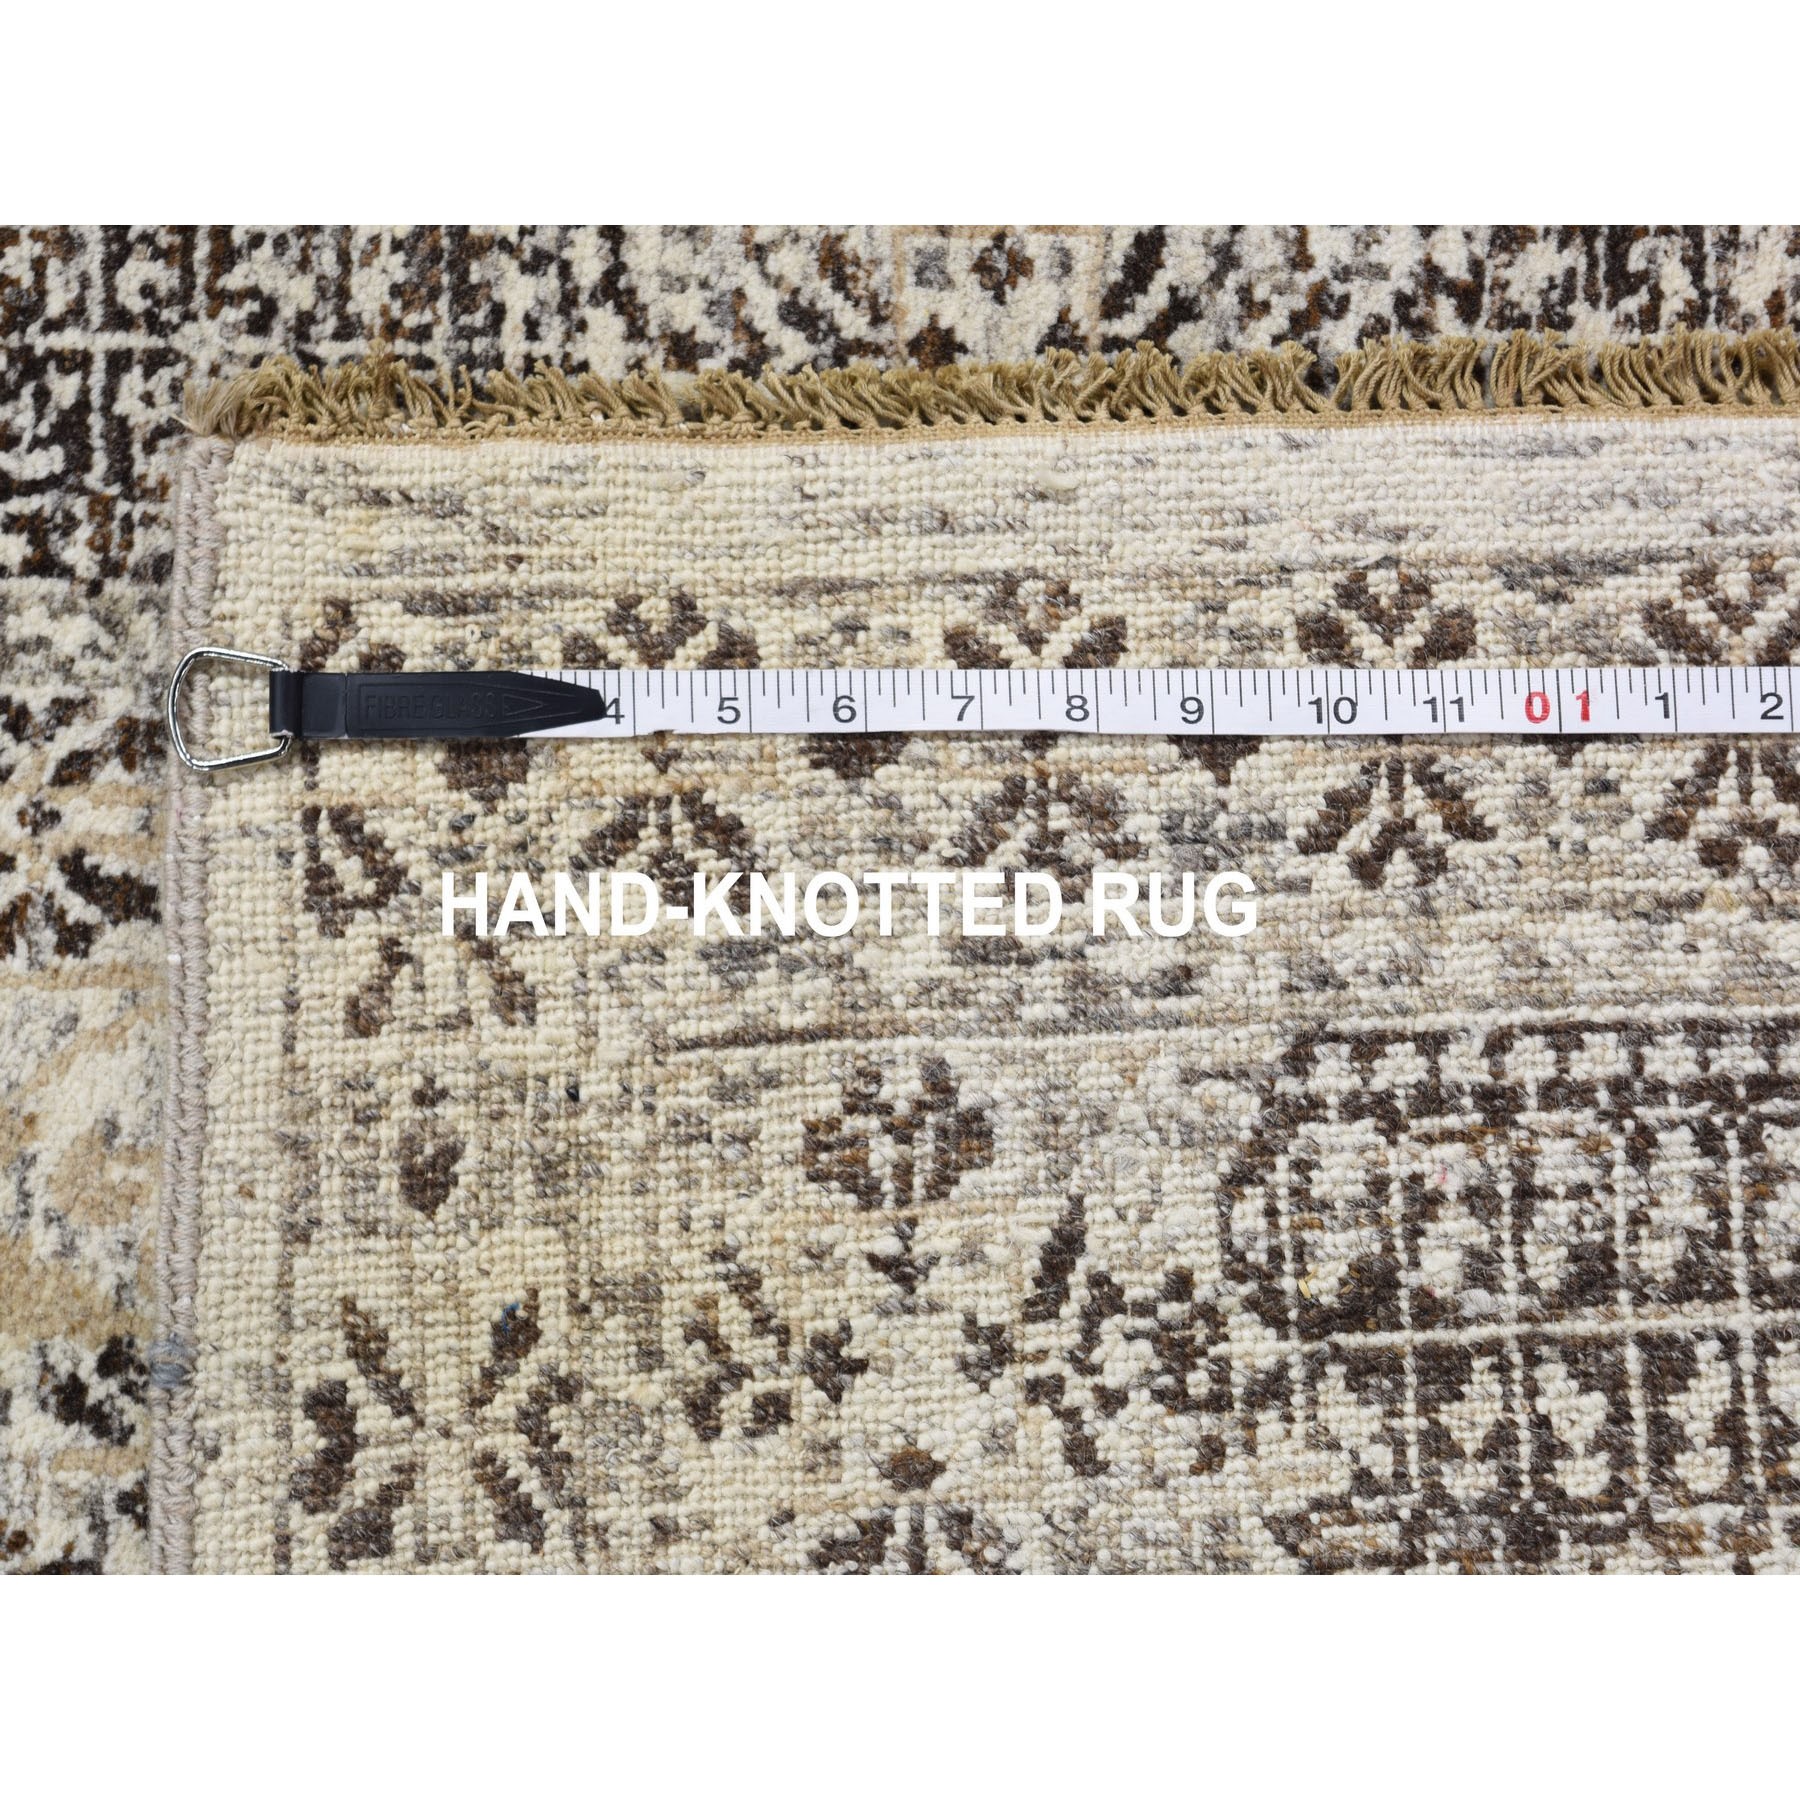 9-x12- Mamluk Design Hand-Knotted Undyed Natural Wool Oriental Rug 